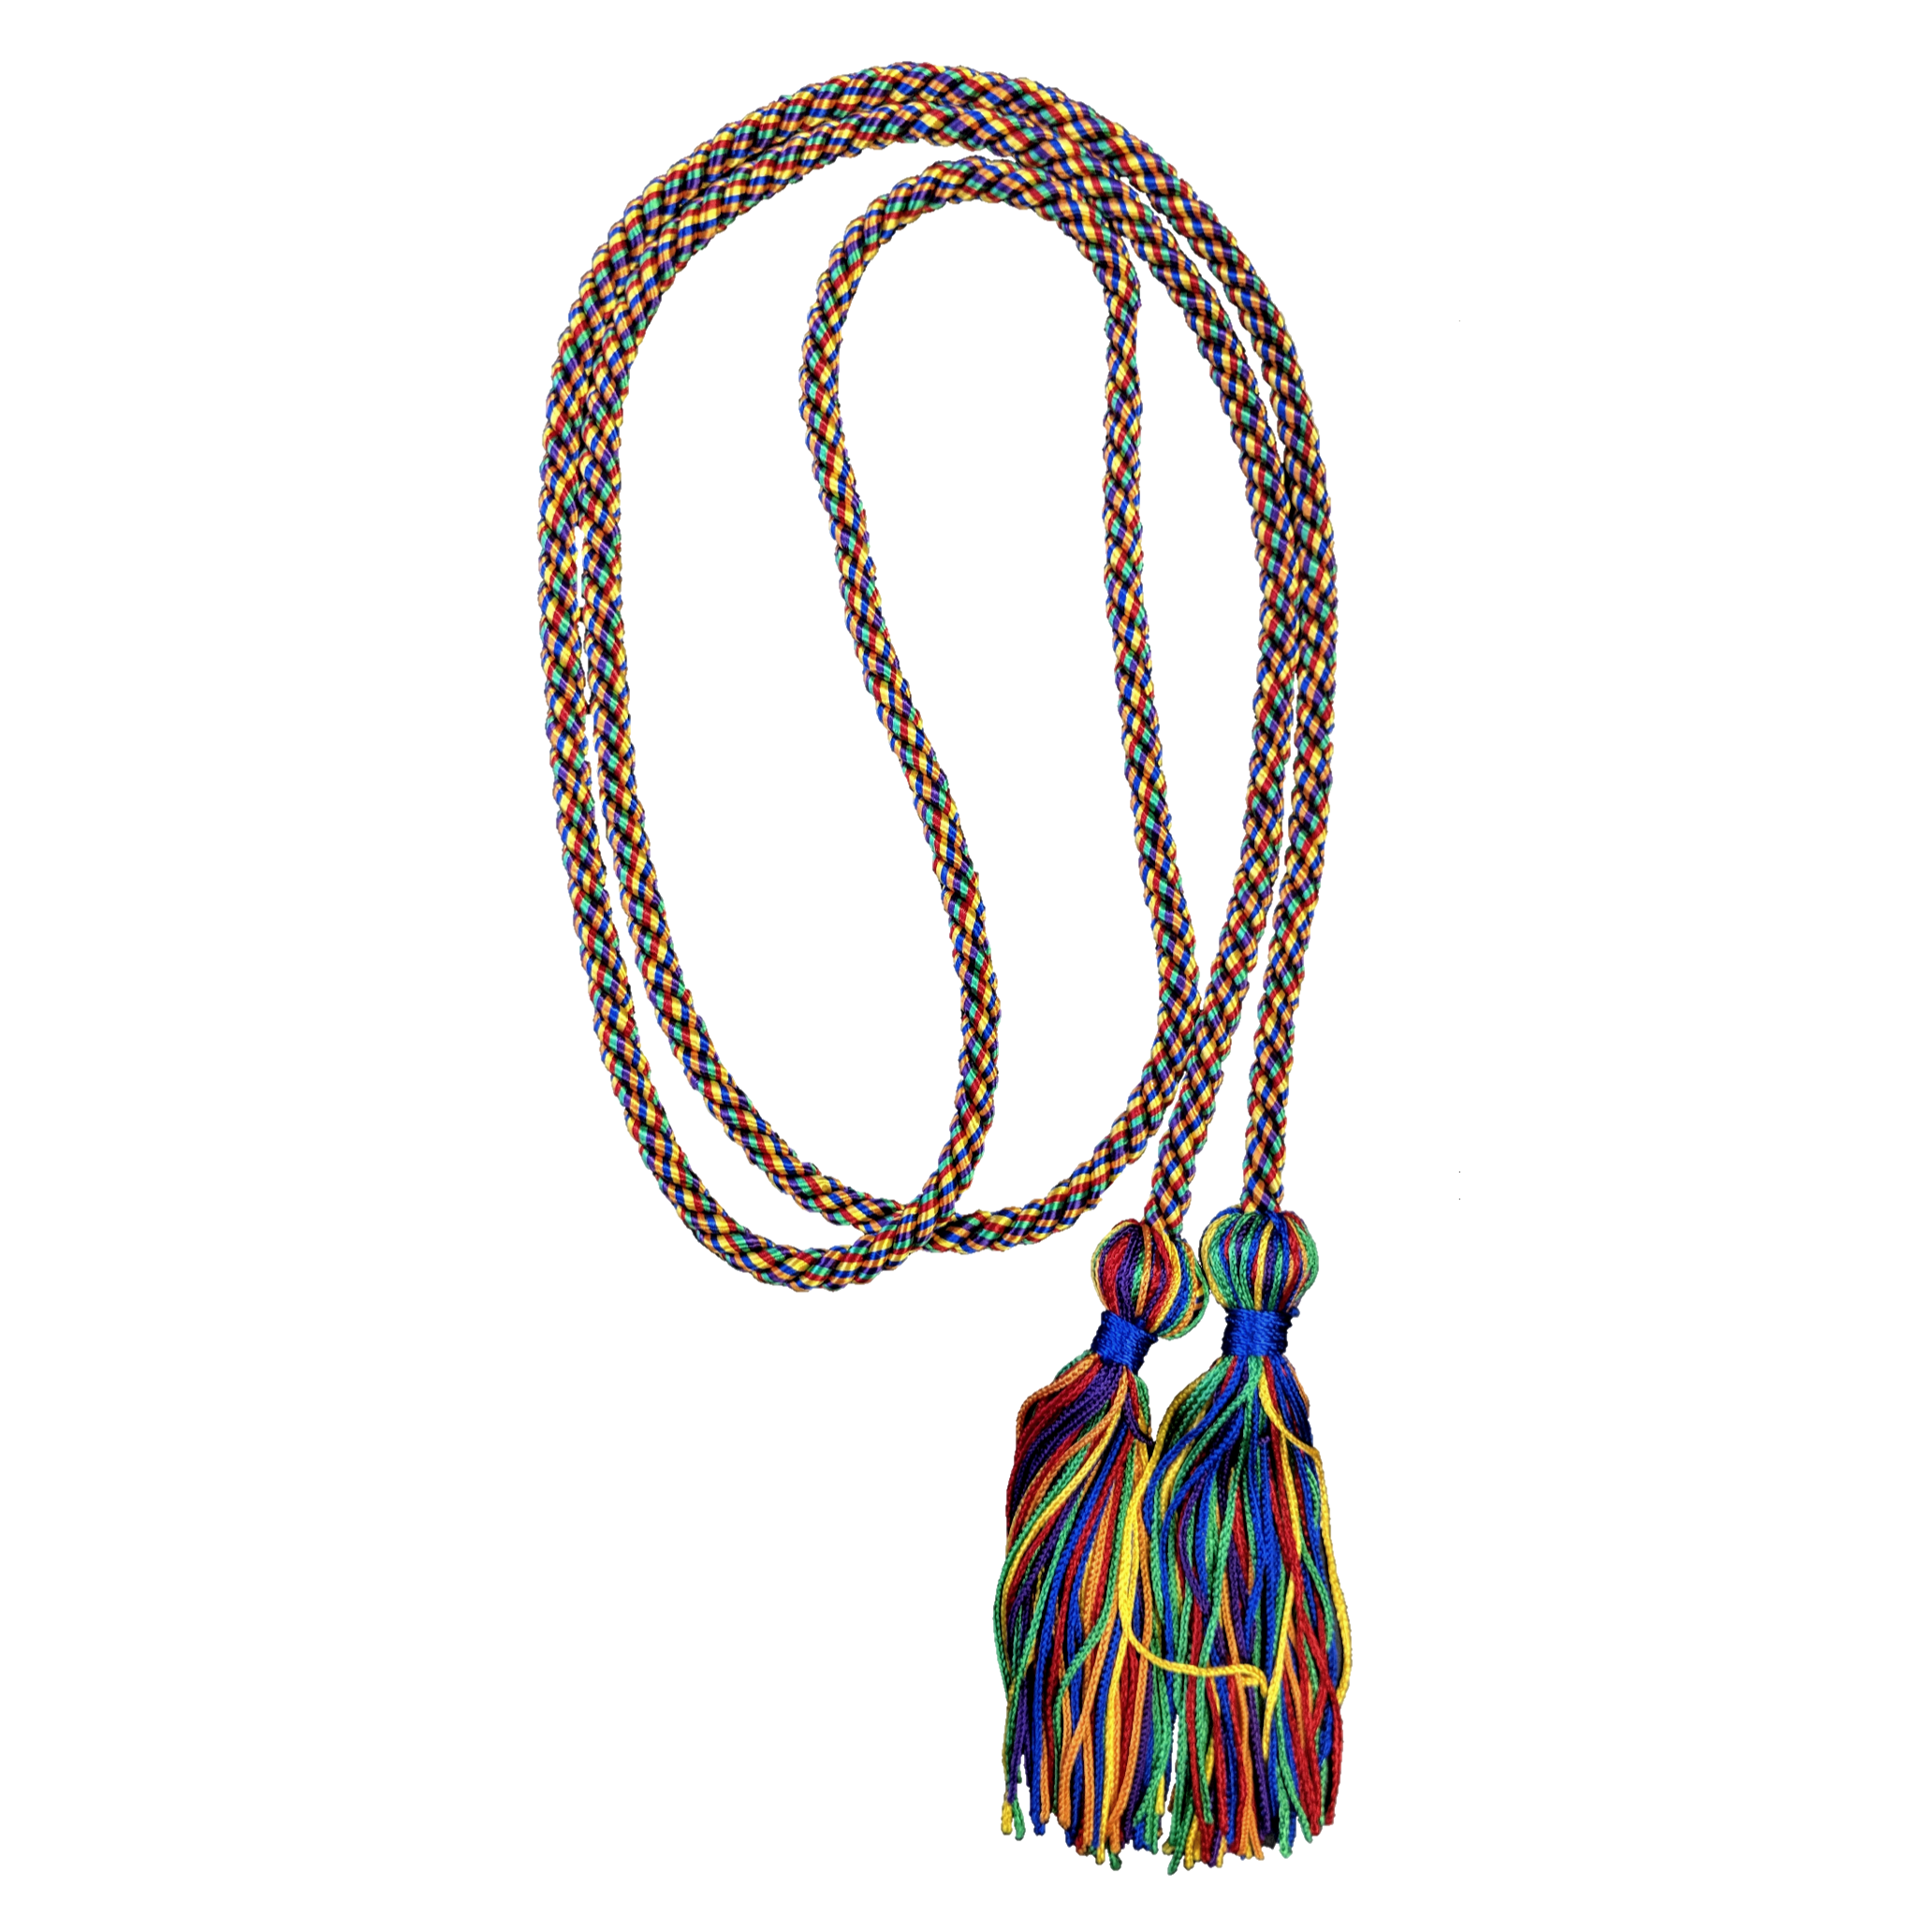 bgs honor cords